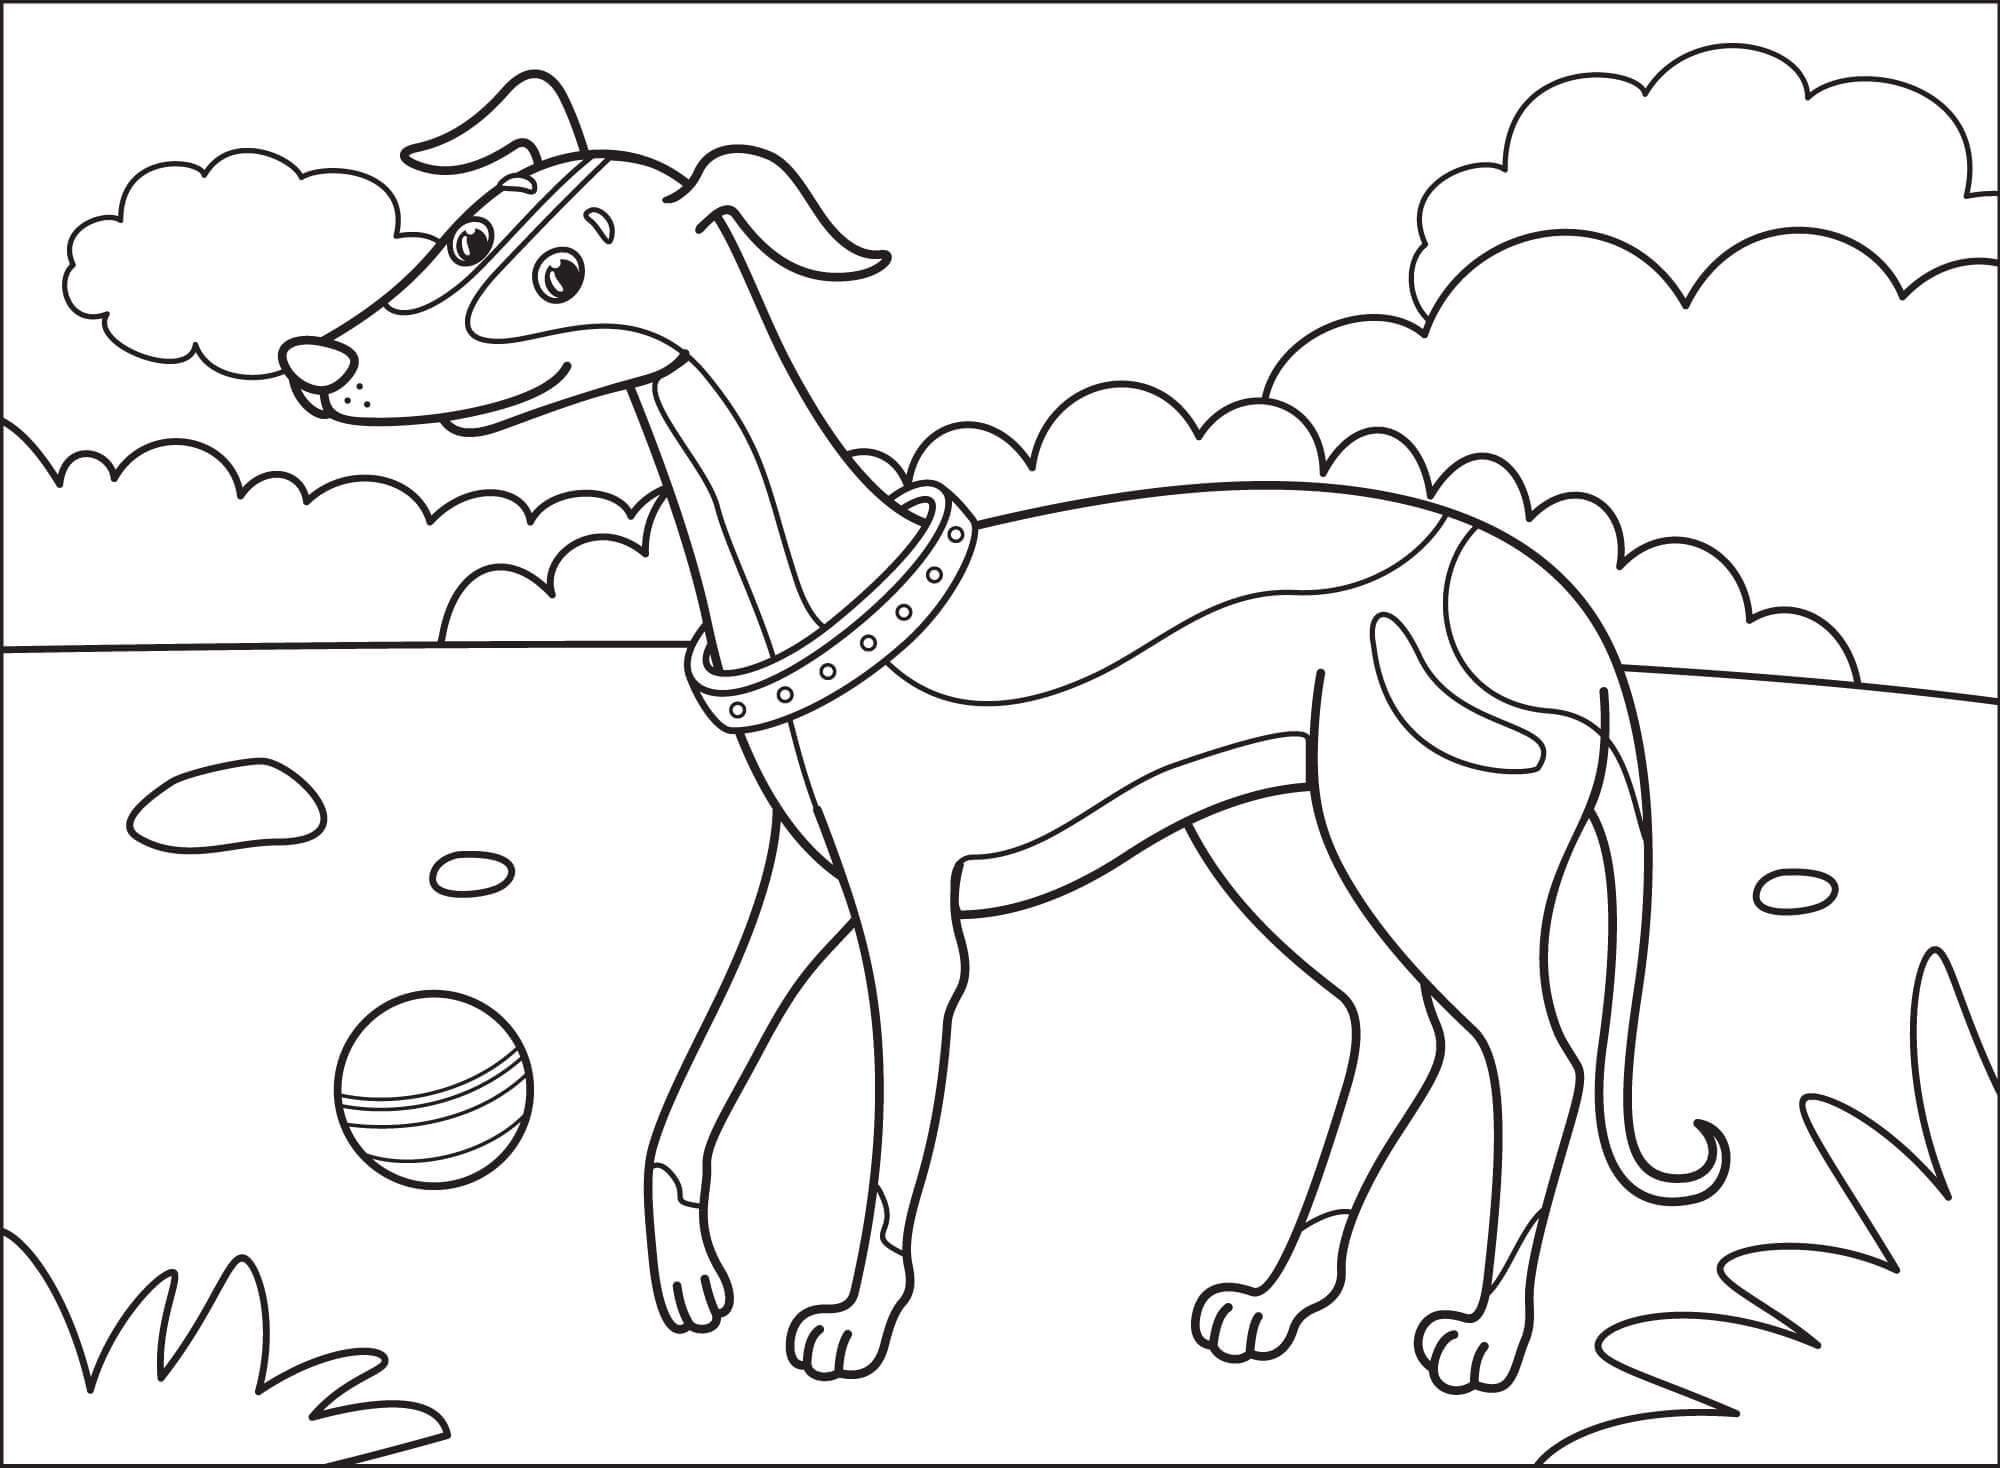 Greyhound Coloring Page